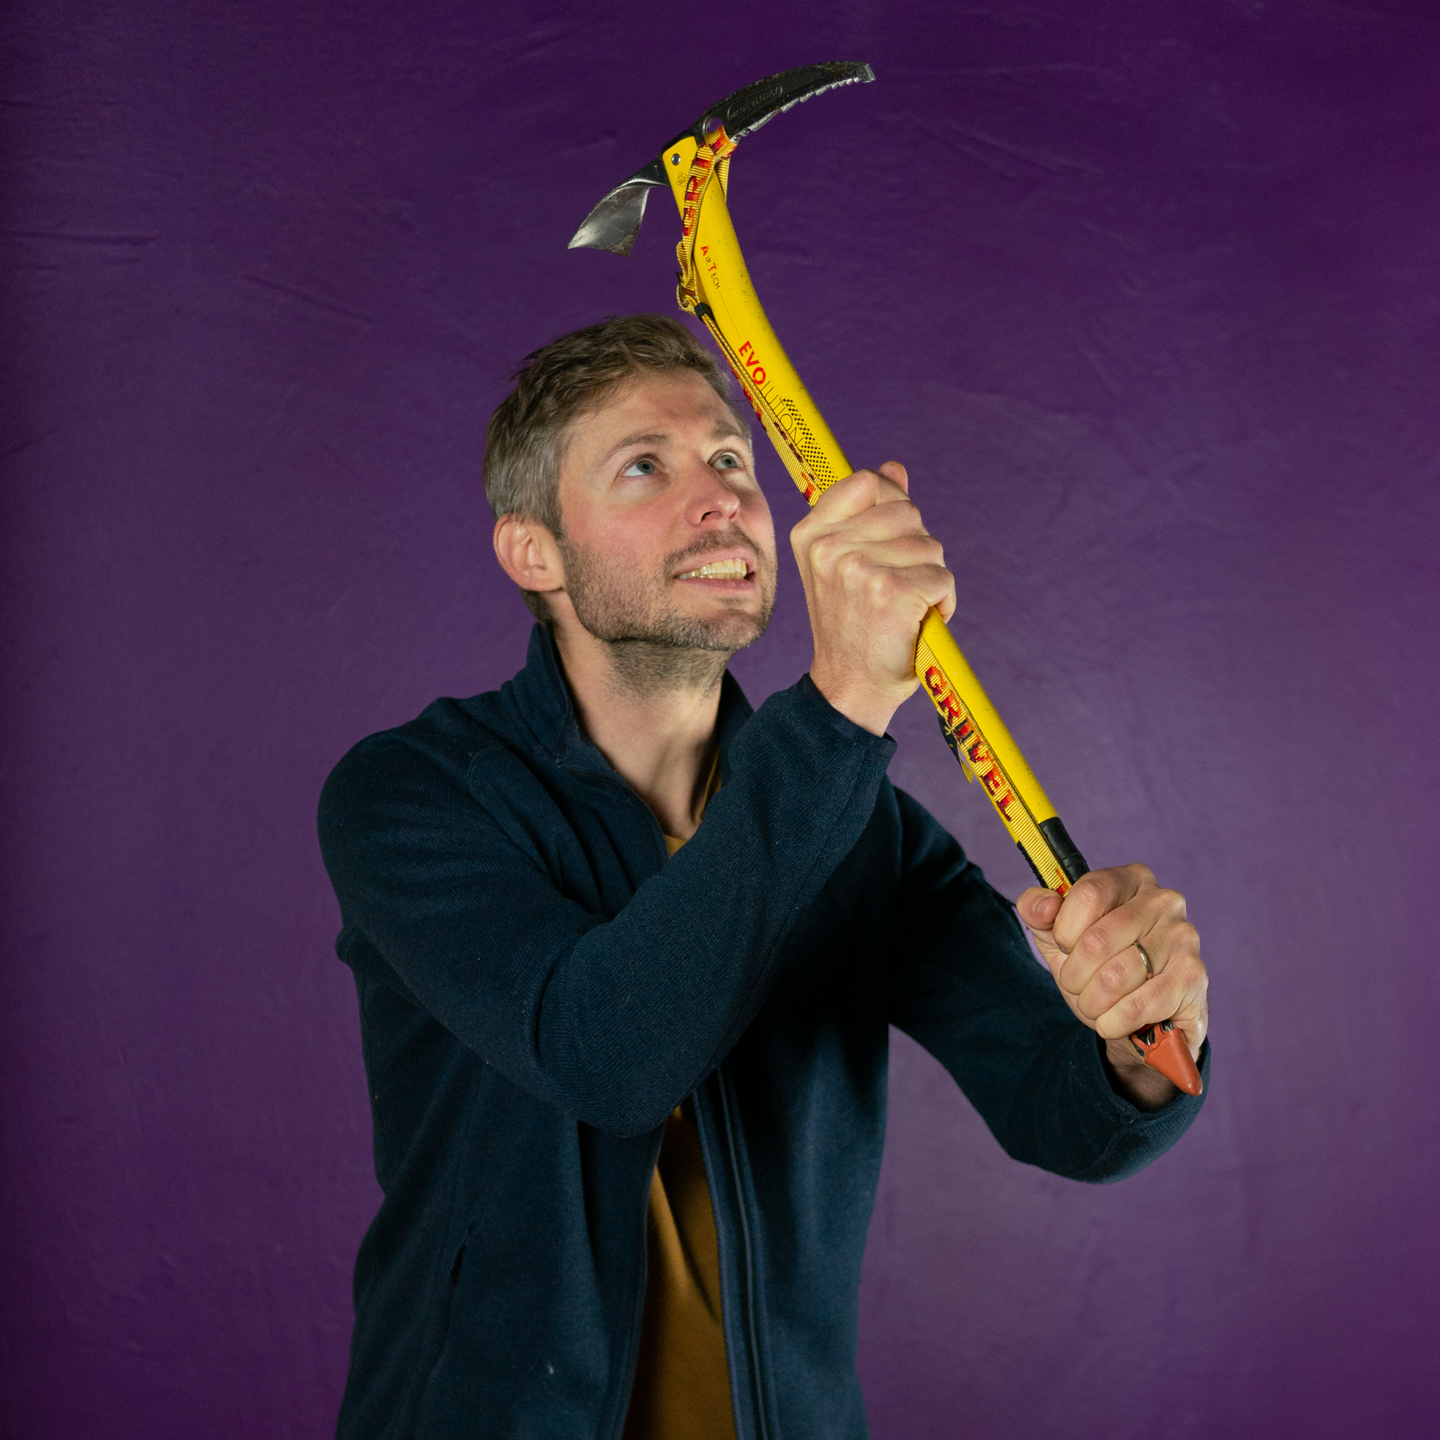 A photo of Norman against a purple background. He's a white man with short dark hair and a beard and moustache. He's looking up to the sky and has an ice axe in his hands which he is wielding with both hands.